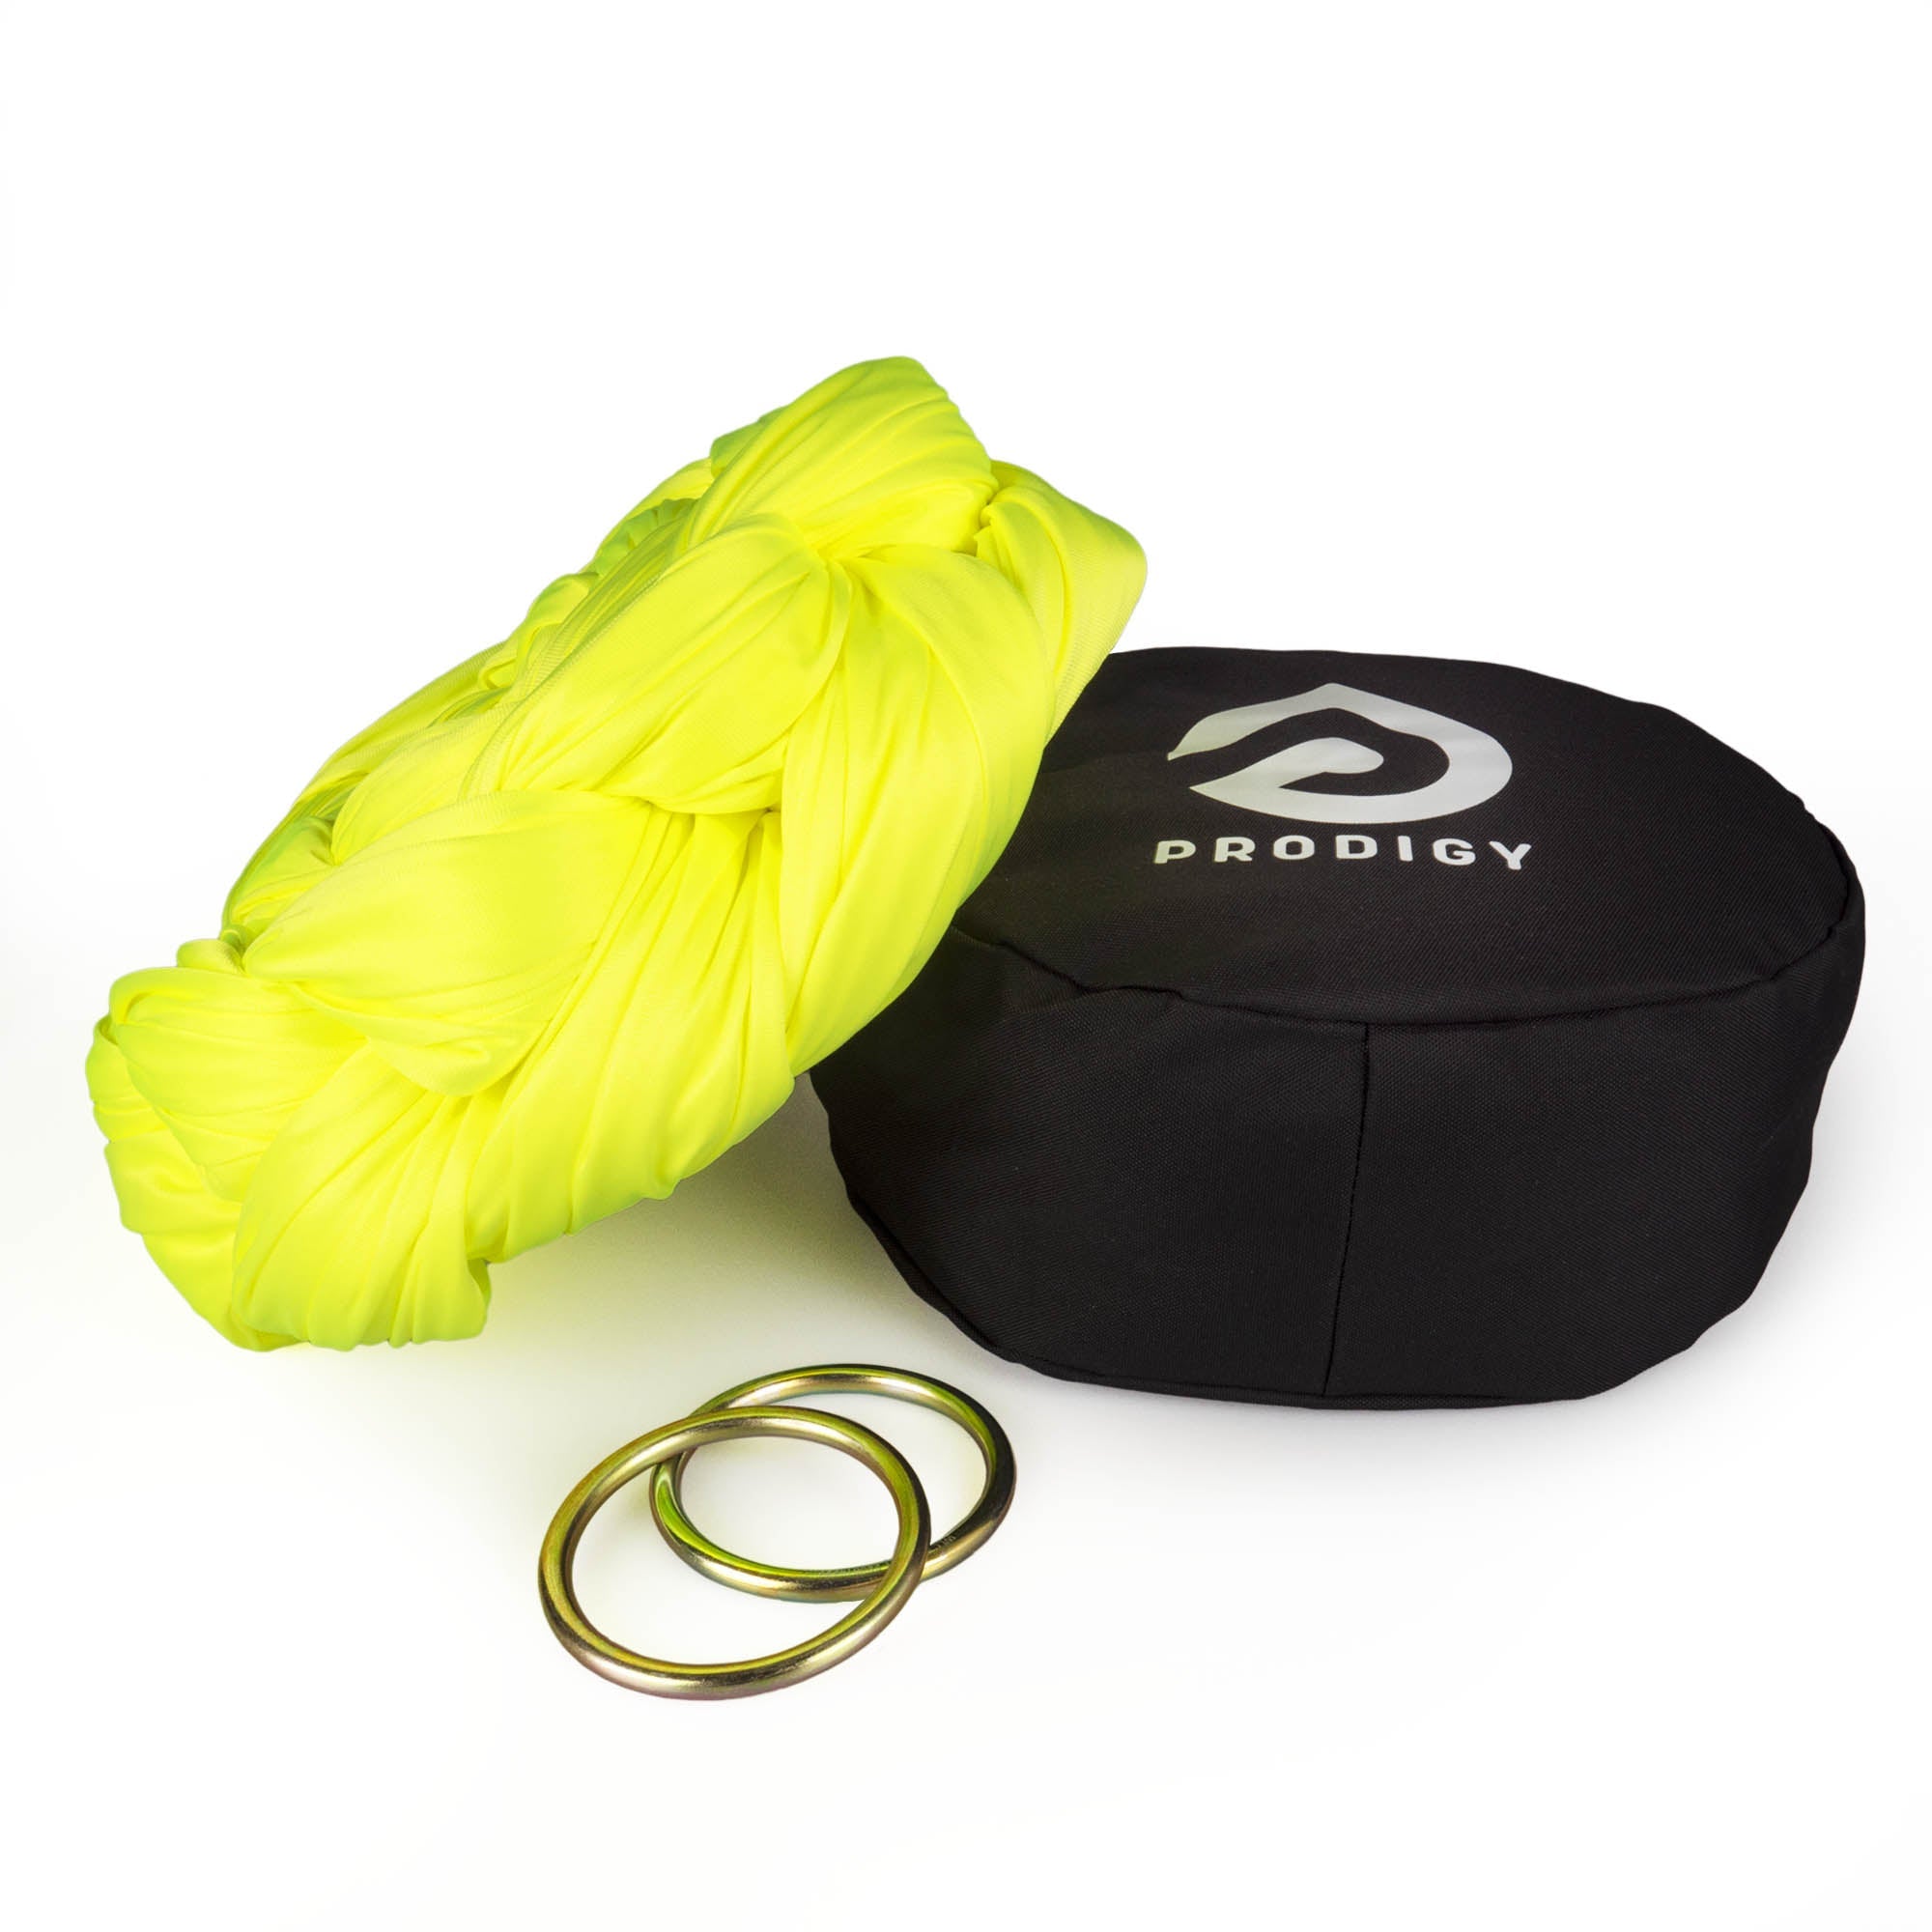 Prodigy aerial sling and O rings and bag - neon yellow sling resting on hammock bag